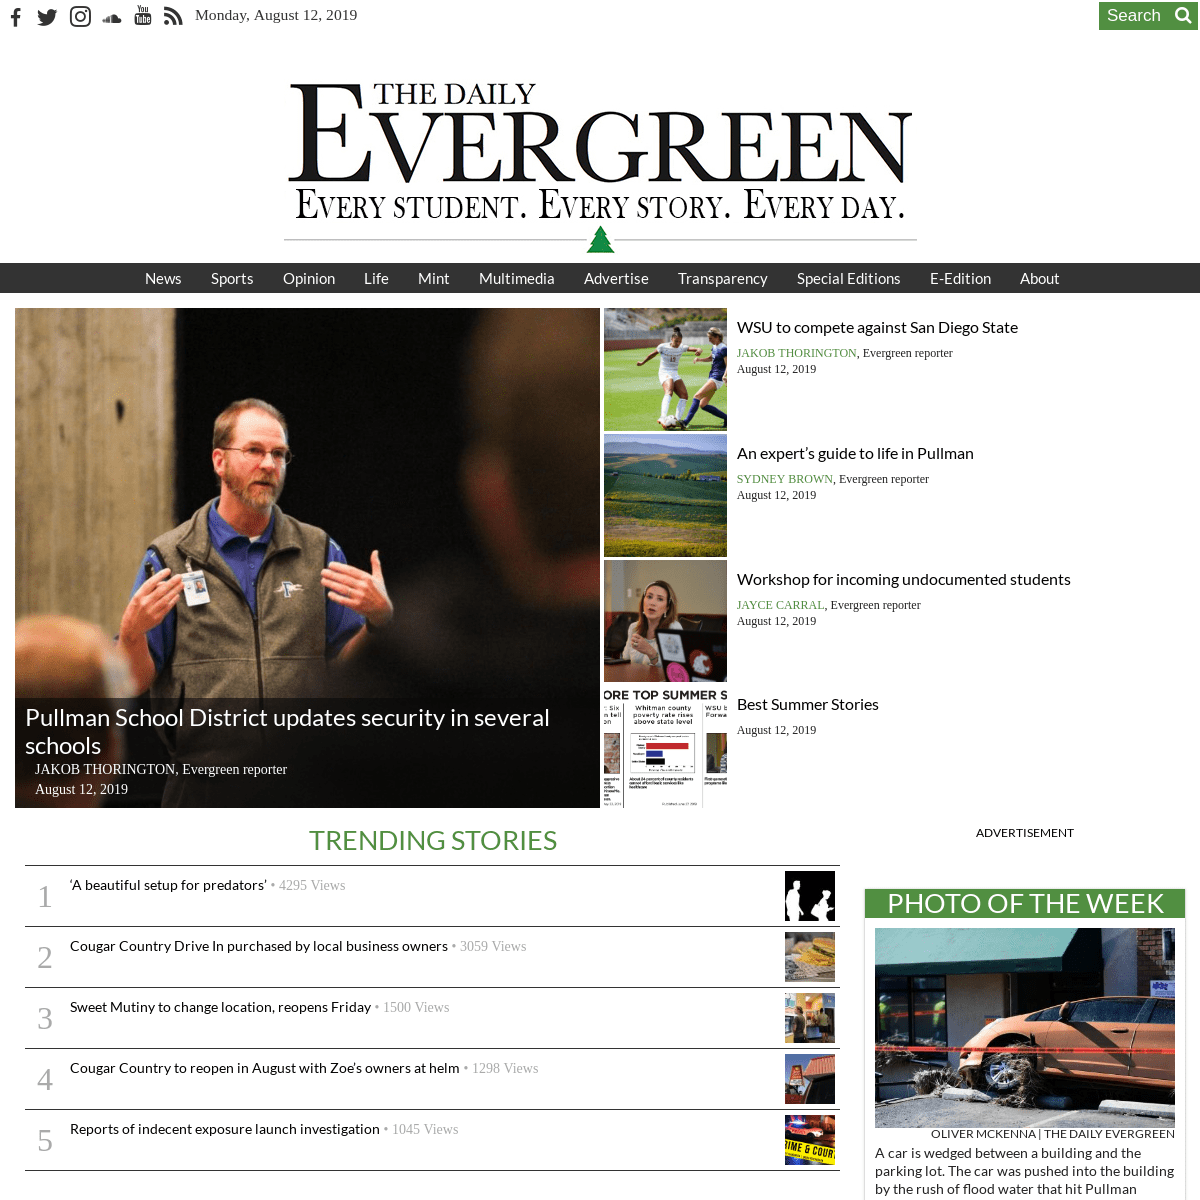 The Daily Evergreen – Every student. Every story. Every day.